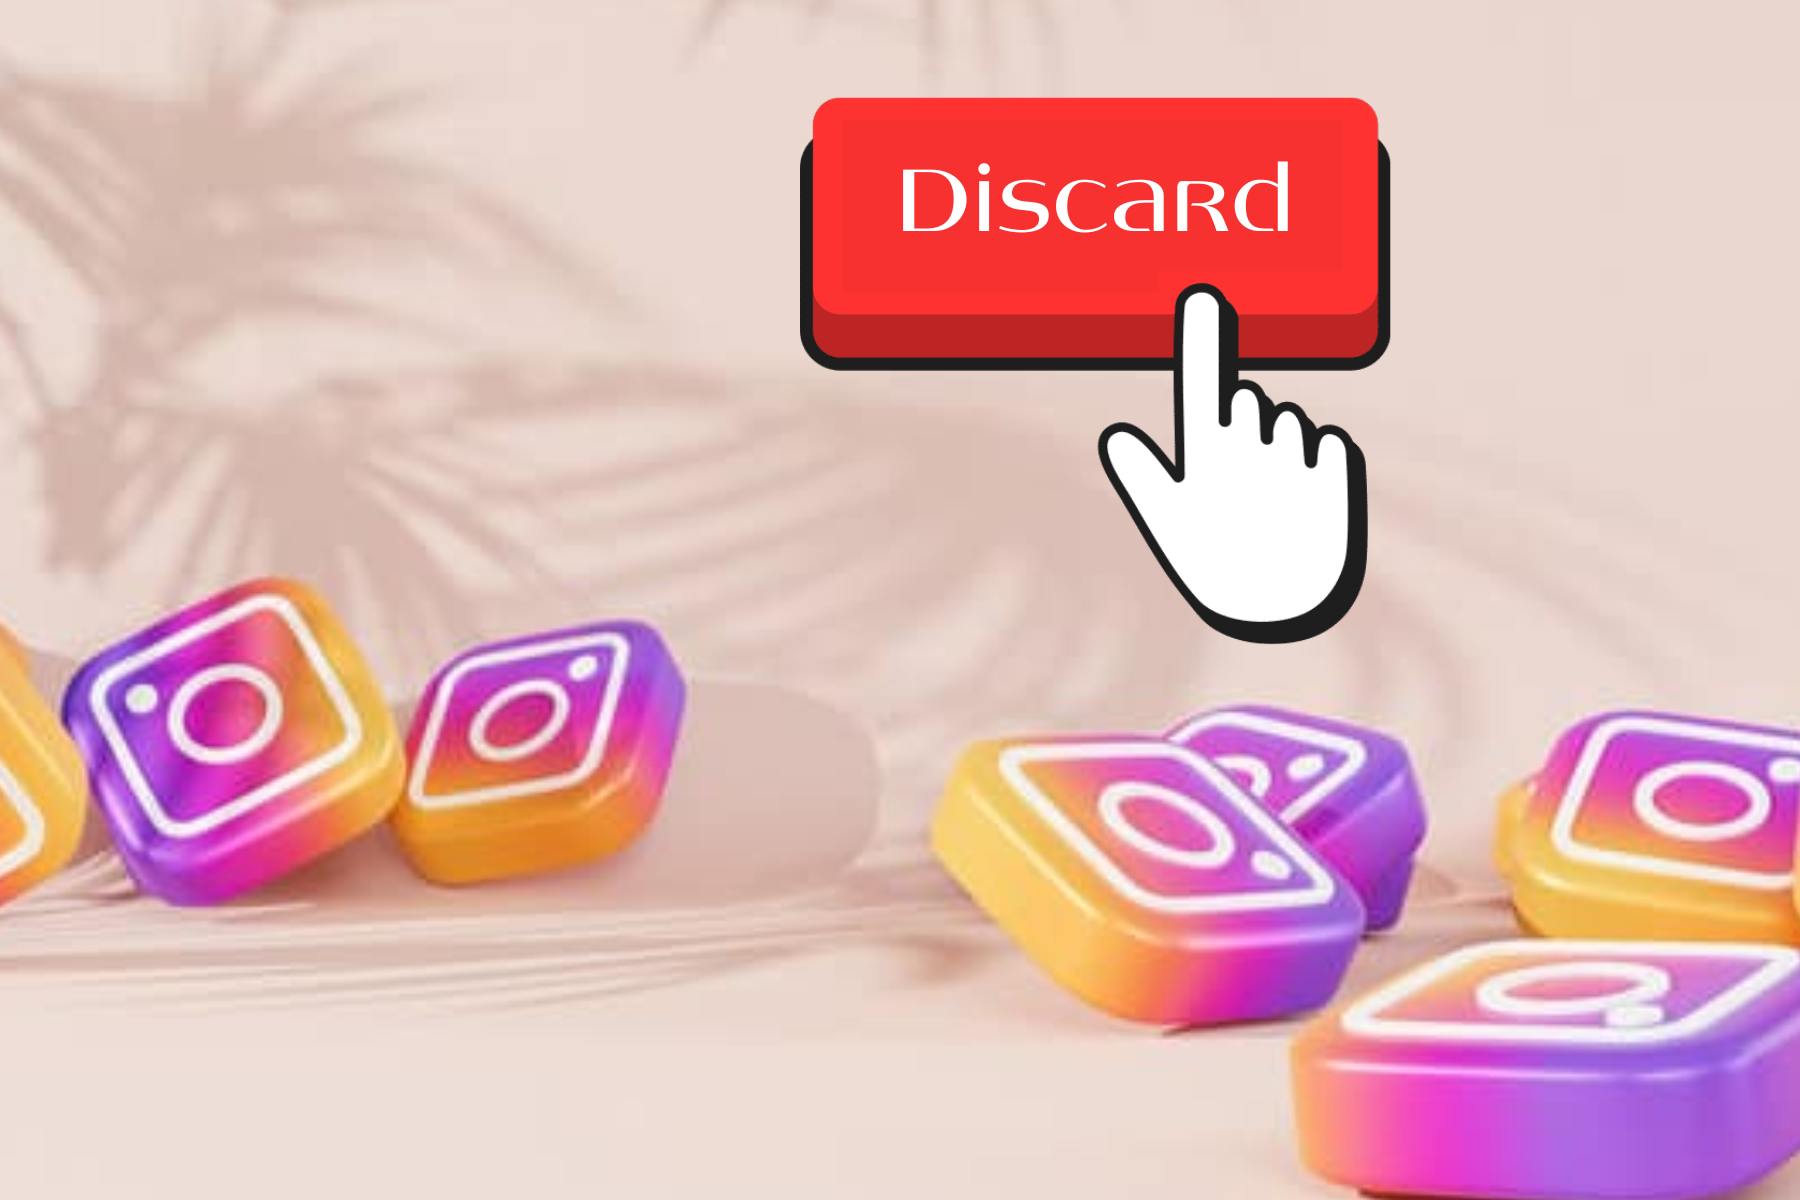 Instagramm icons with a Discard button